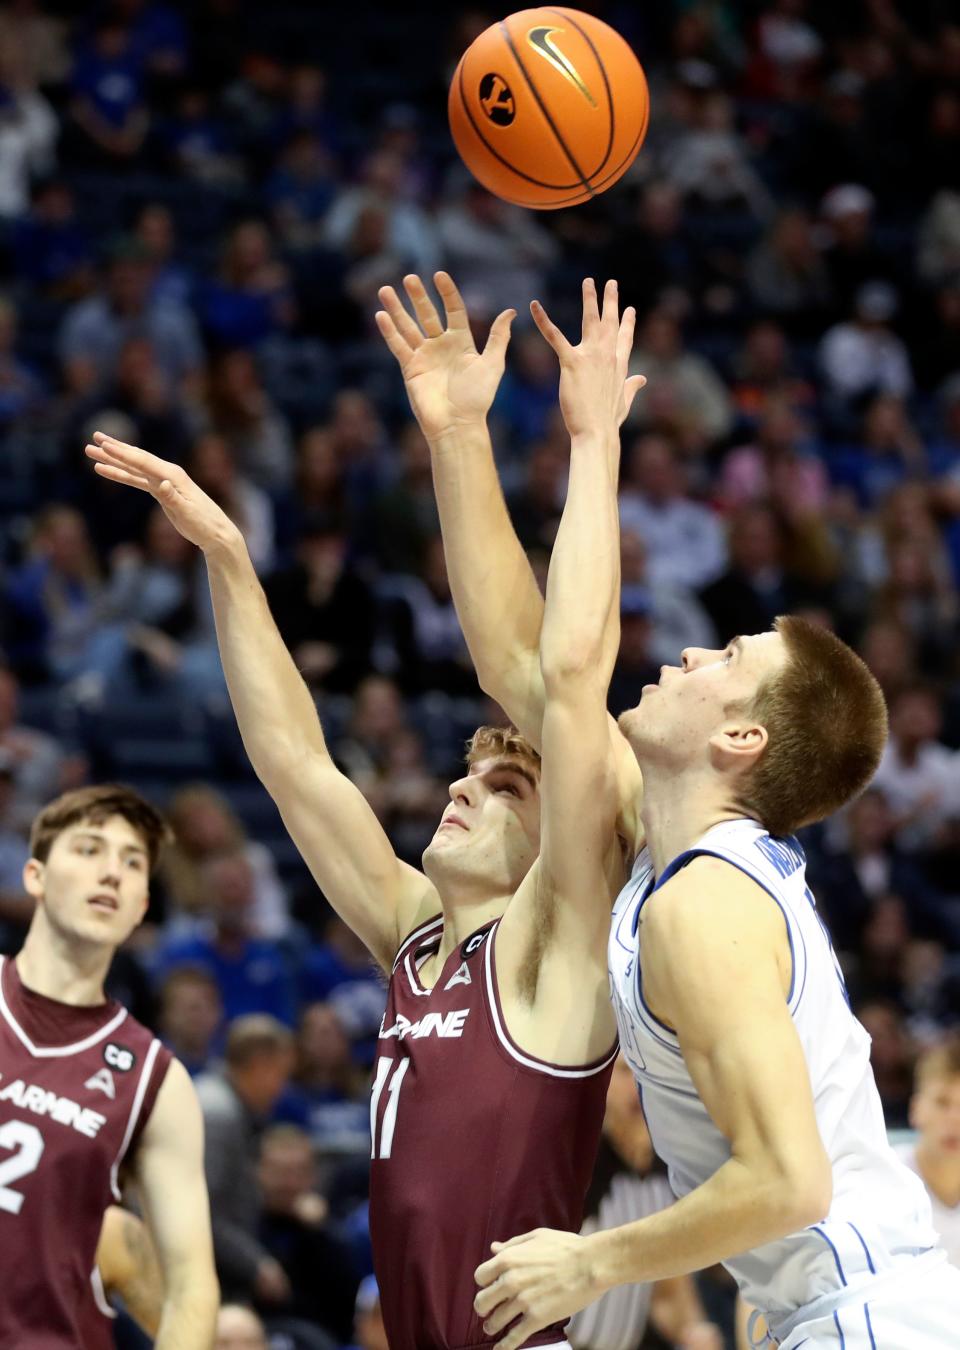 Bellarmine Knights guard Billy Smith (11) and Brigham Young Cougars forward Noah Waterman (0) reach for the ball during a men’s basketball game at the Marriott Center in Provo on Friday, Dec. 22, 2023. BYU won 101-59. | Kristin Murphy, Deseret News